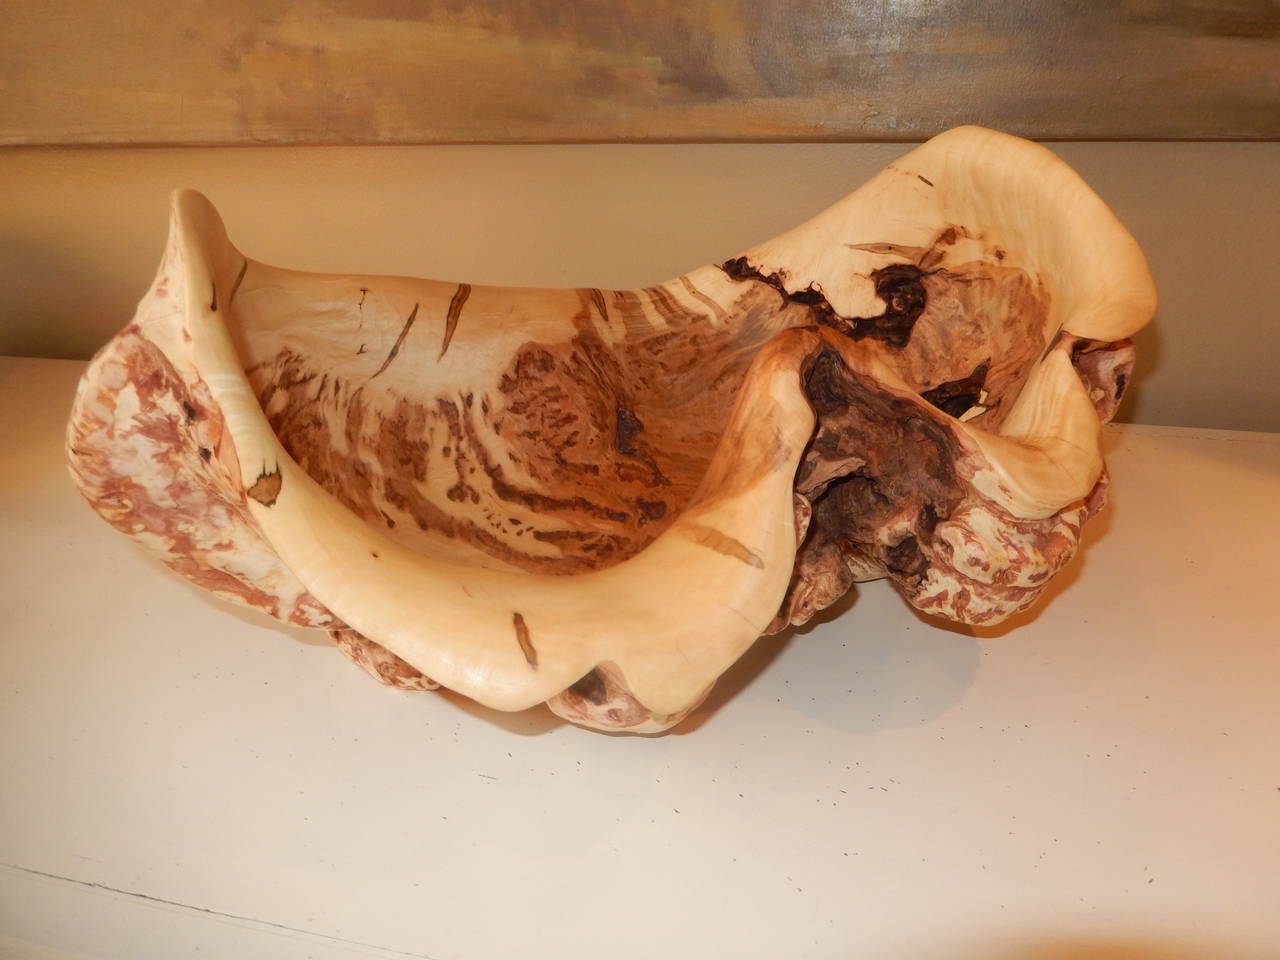 A massive free-form maple/ burl wood vessel or bowl. Naturally found in the shape of a giant clam shell.Polished and oiled to bring out all the natural veins and colors of the wood root.Food safe.